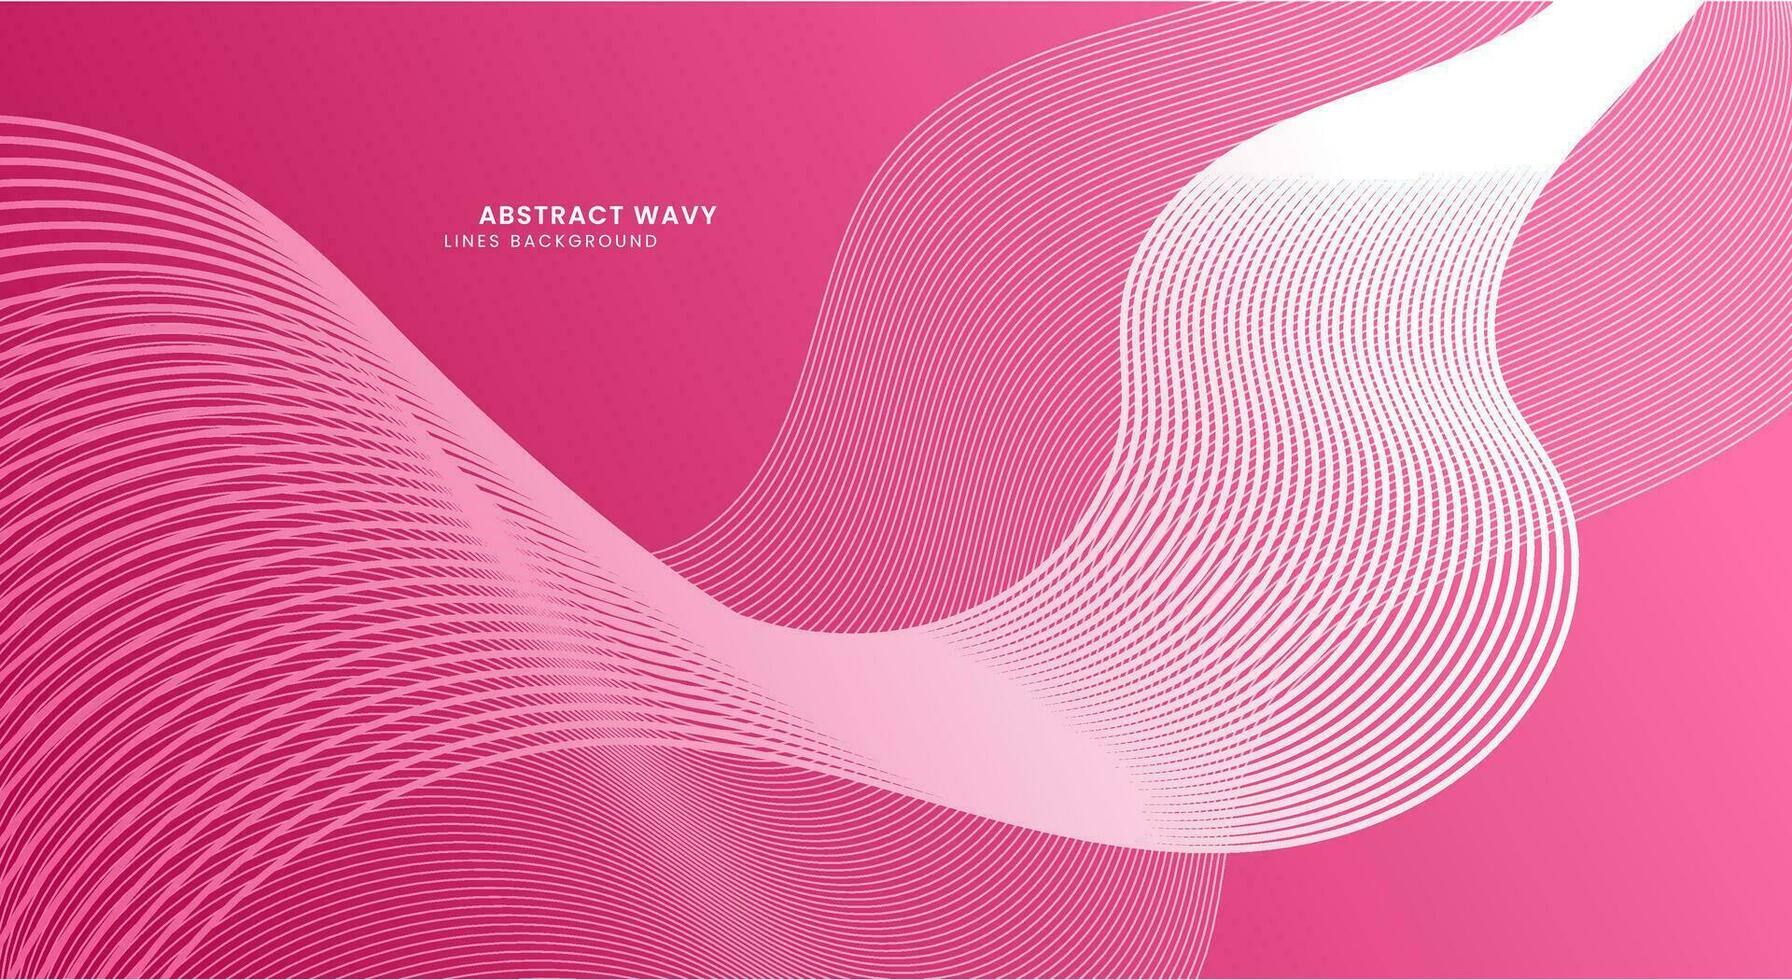 Abstract pink wavy lines background vector